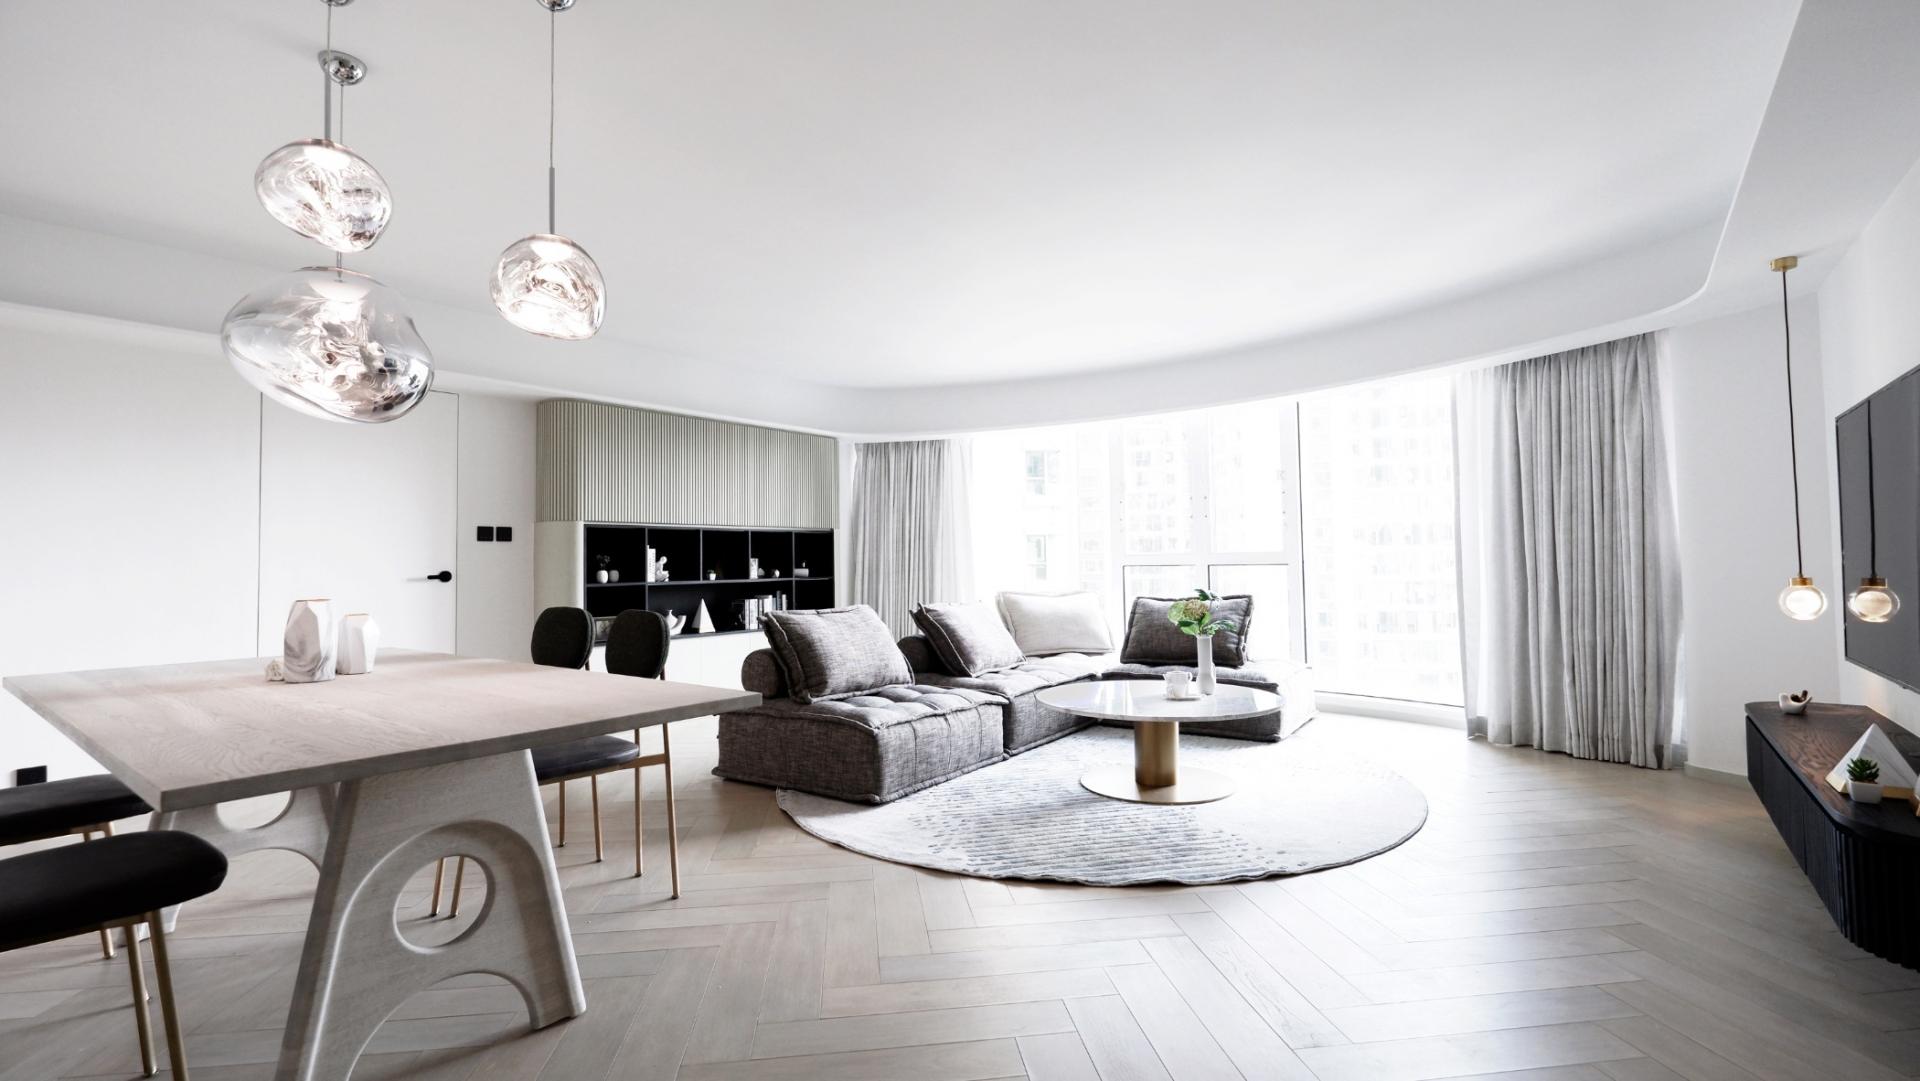 This Hung Hom, Hong Kong home is sleek and stylish in B&W.